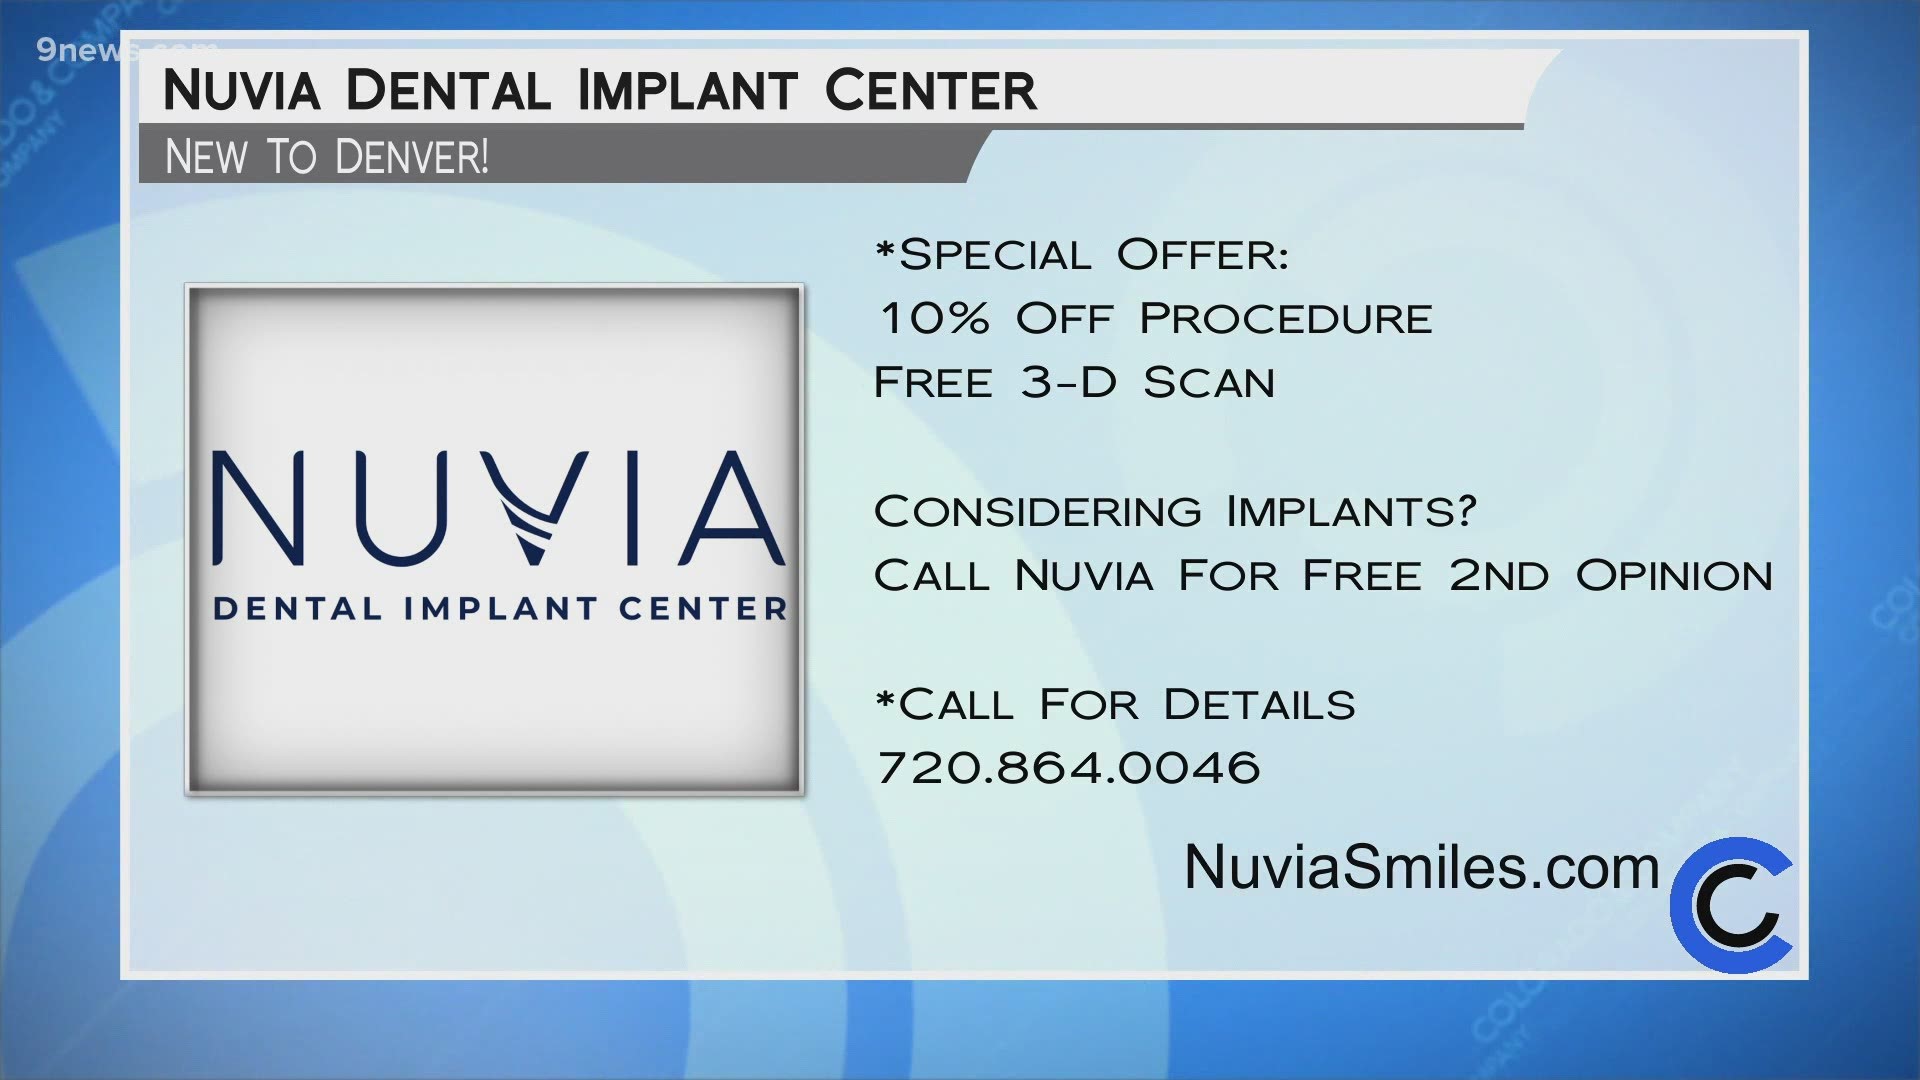 Nuvia Dental offers free 3D scans and second opinions. Call 720.864.0046 or visit NuviaSmiles.com to get started.